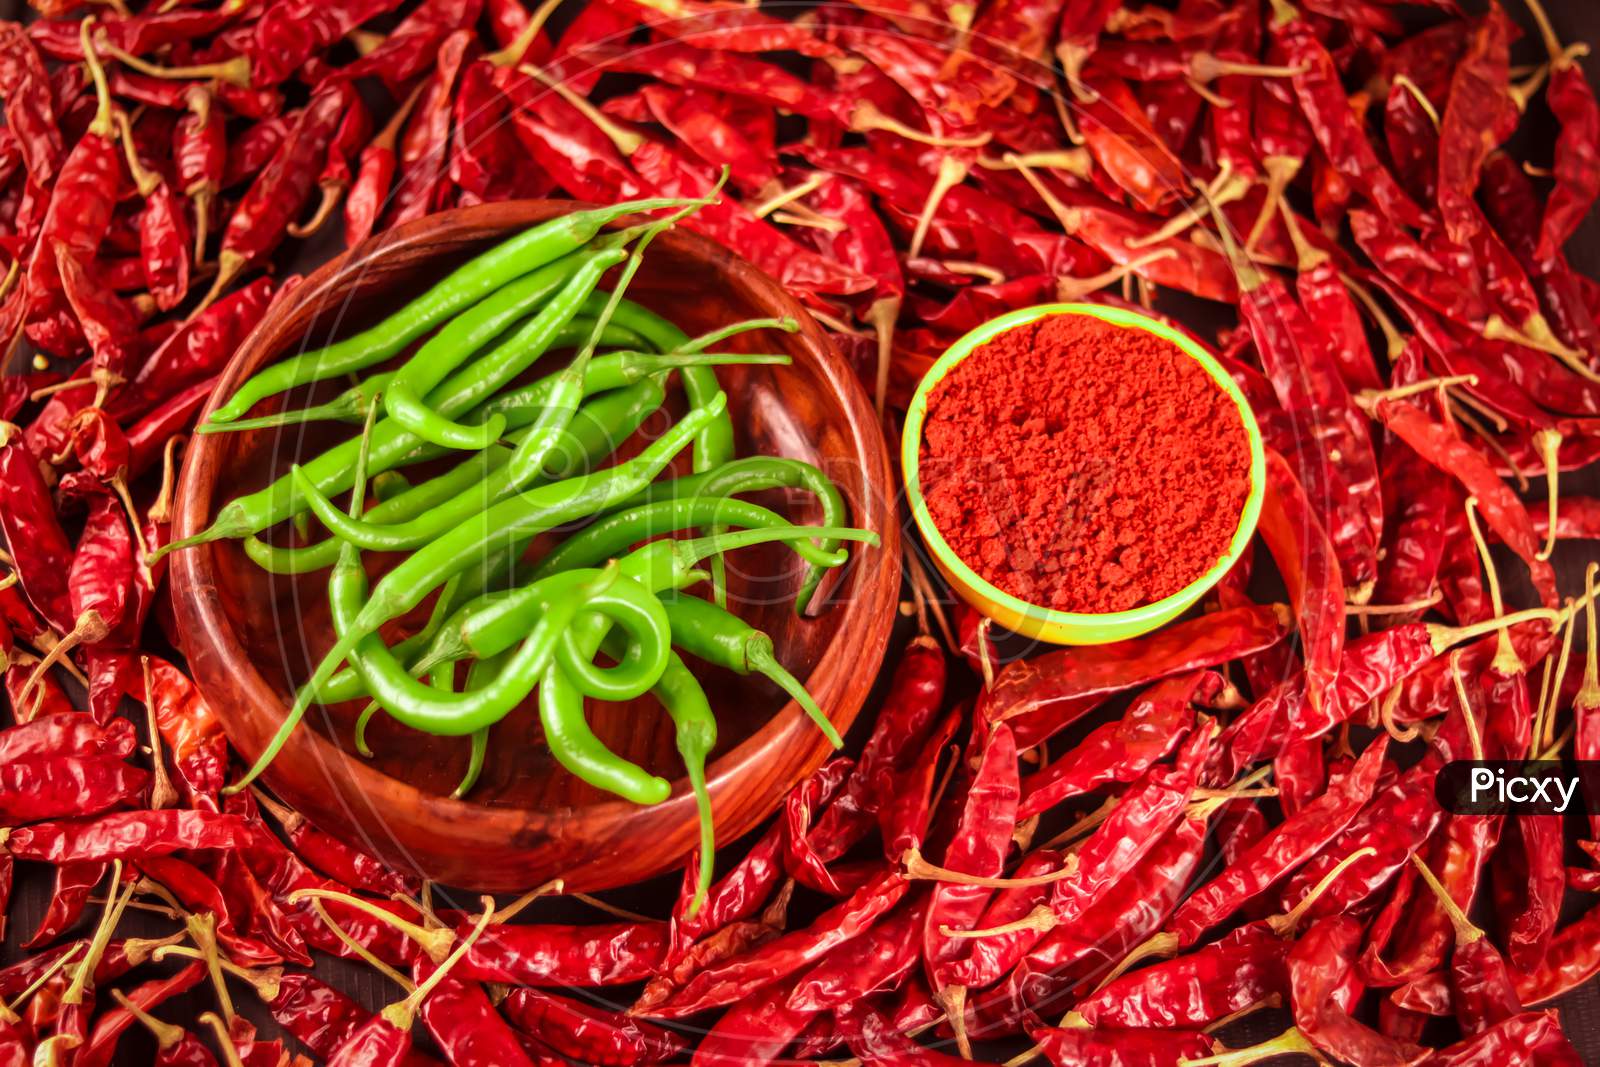 Red Chili Peppers Powder In Yellow Bowl In Wooden Spoon On Chili Peppers Background,Green Chili And Red Chilli,Spices And Bowl With Chilli Pepper On Wooden Background